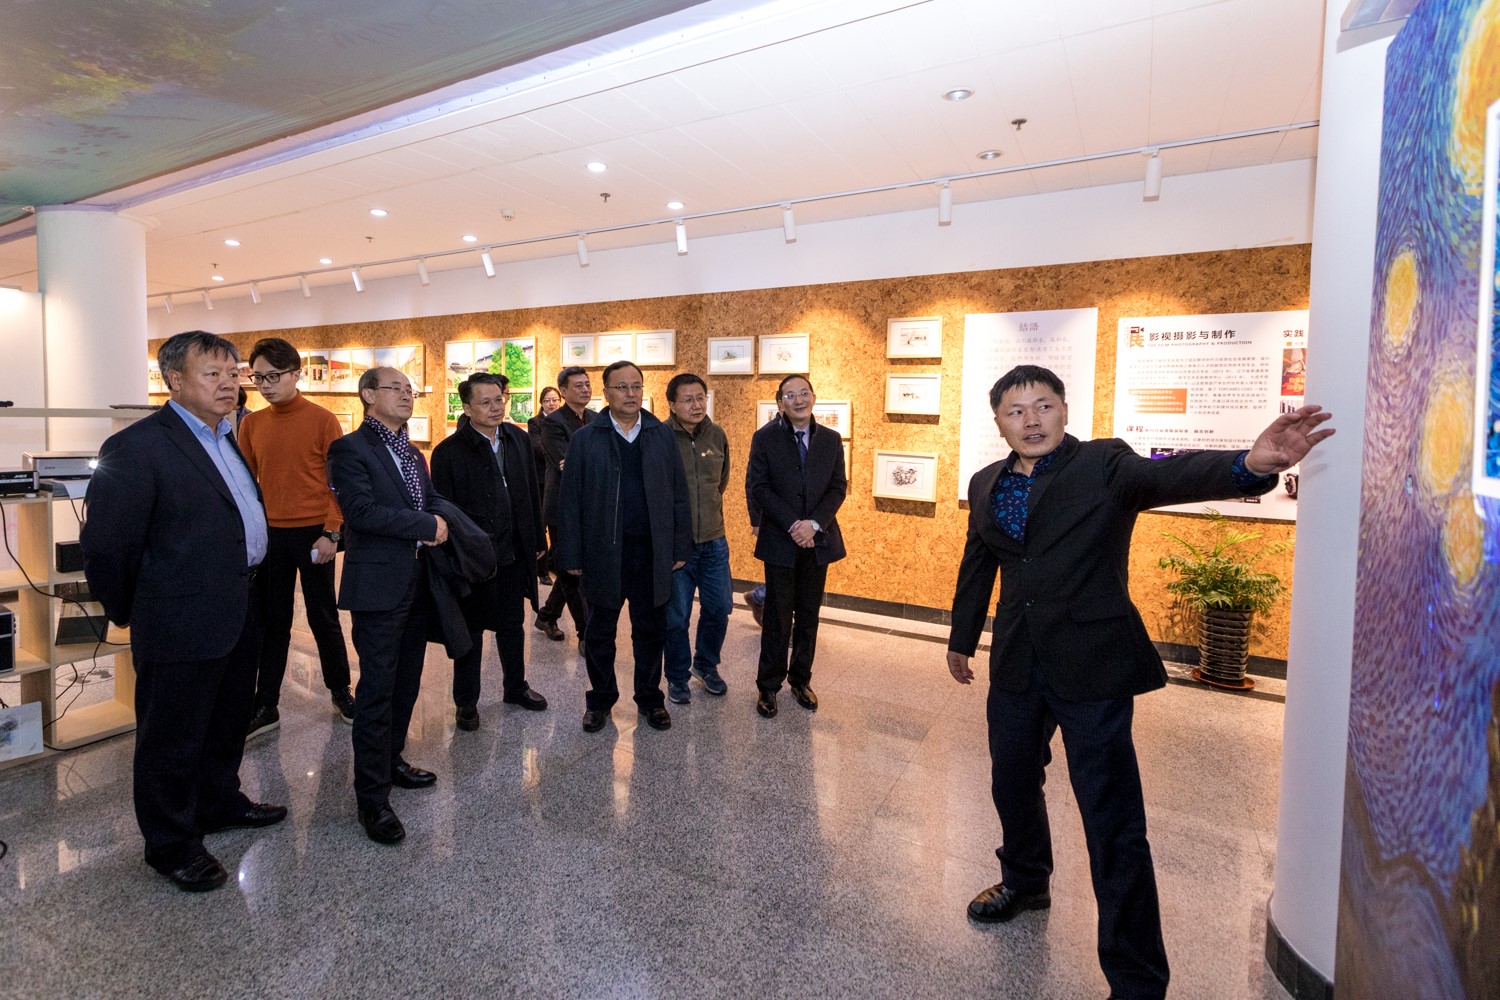 The guests visit the School of Digital Arts and Design.